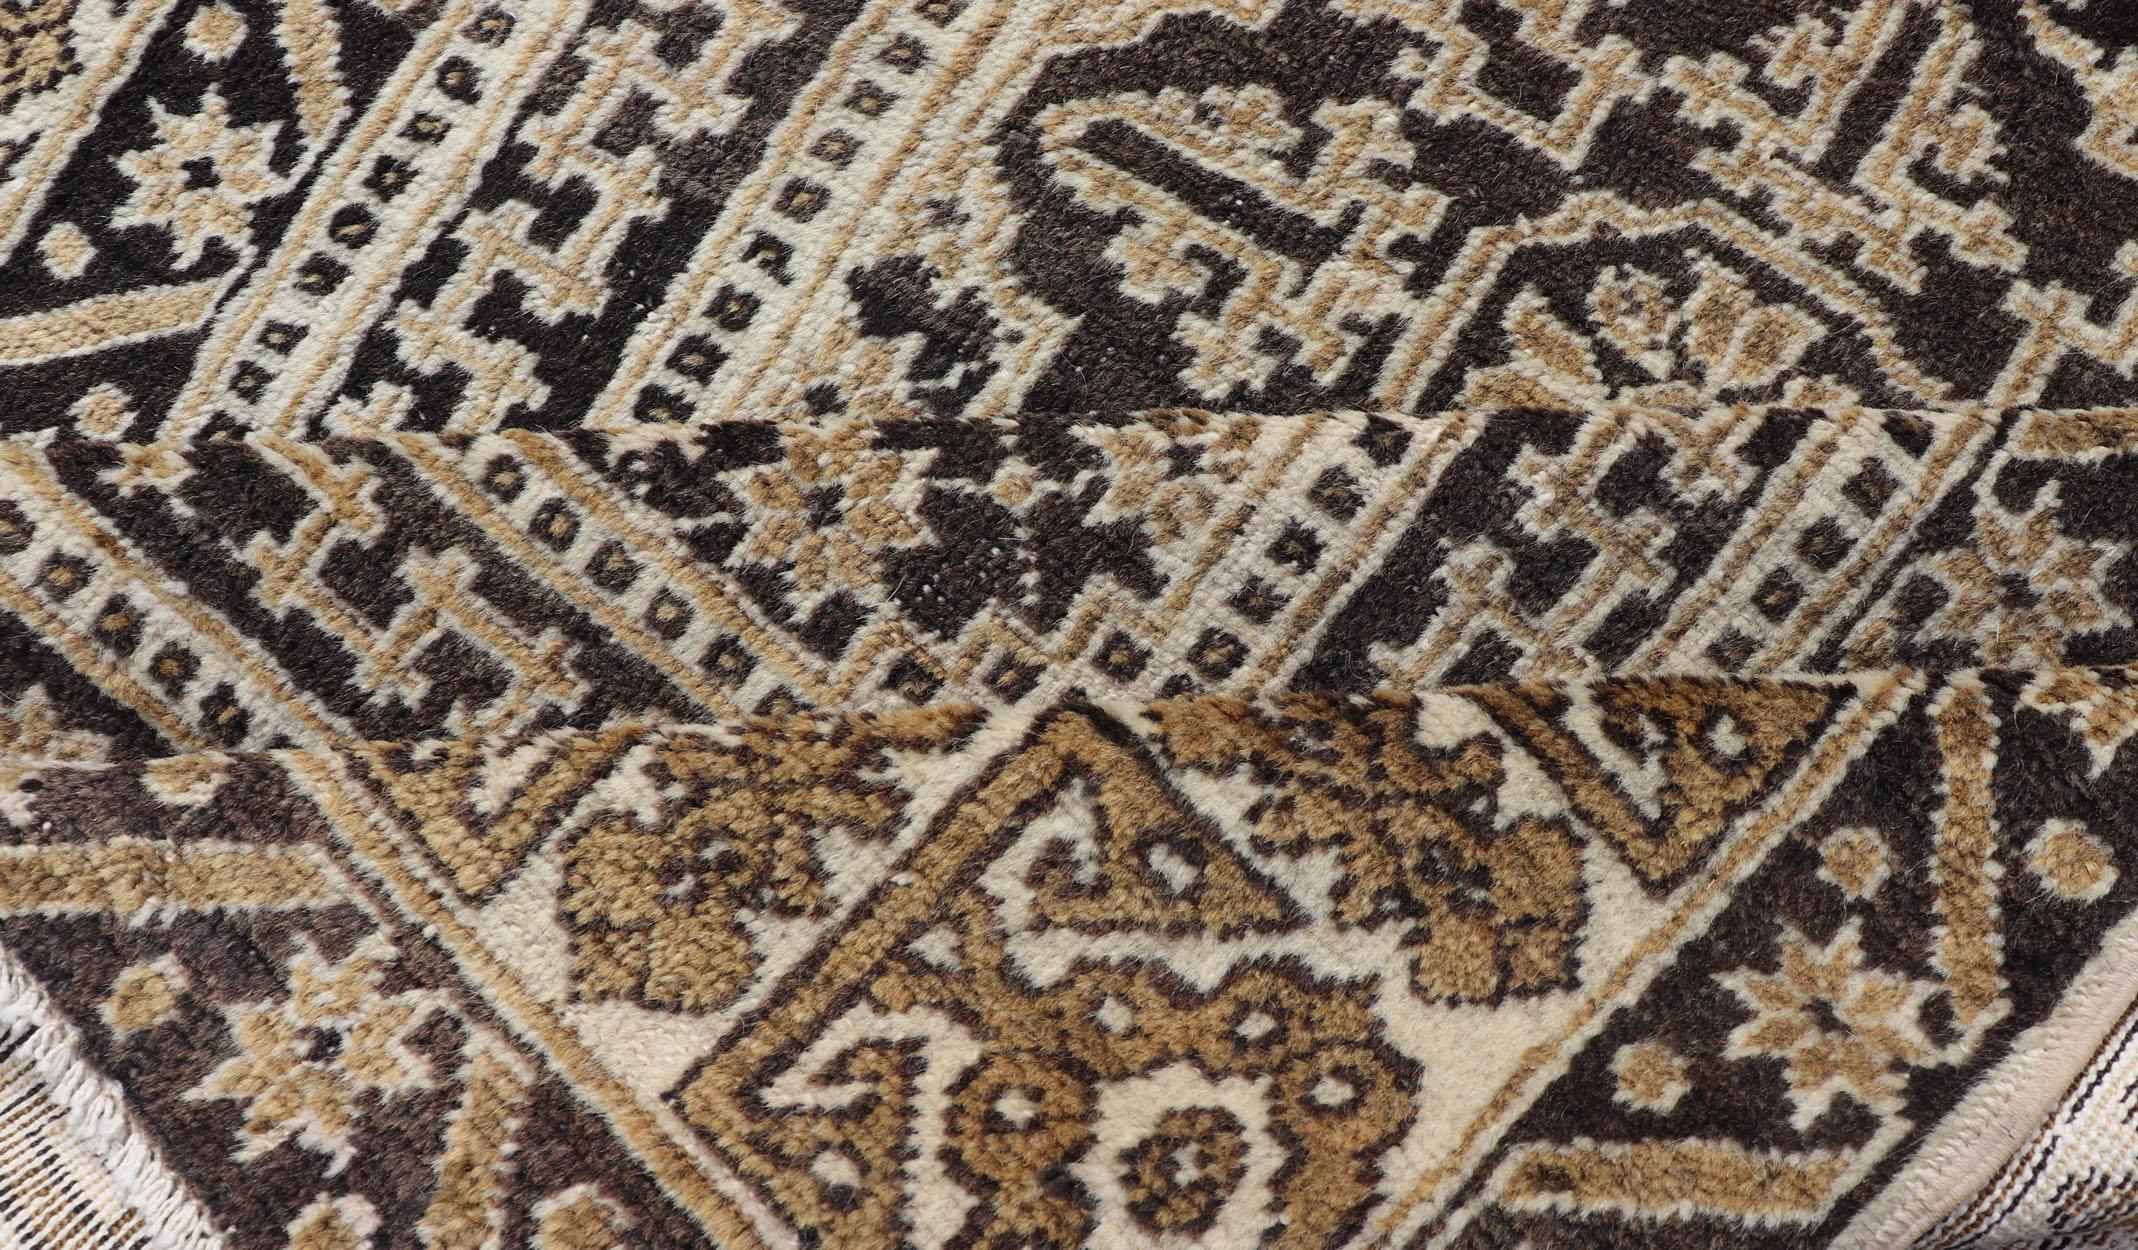 All-Over with Medallion Design Turkish Carpet in Shades of Brown and Cream For Sale 3